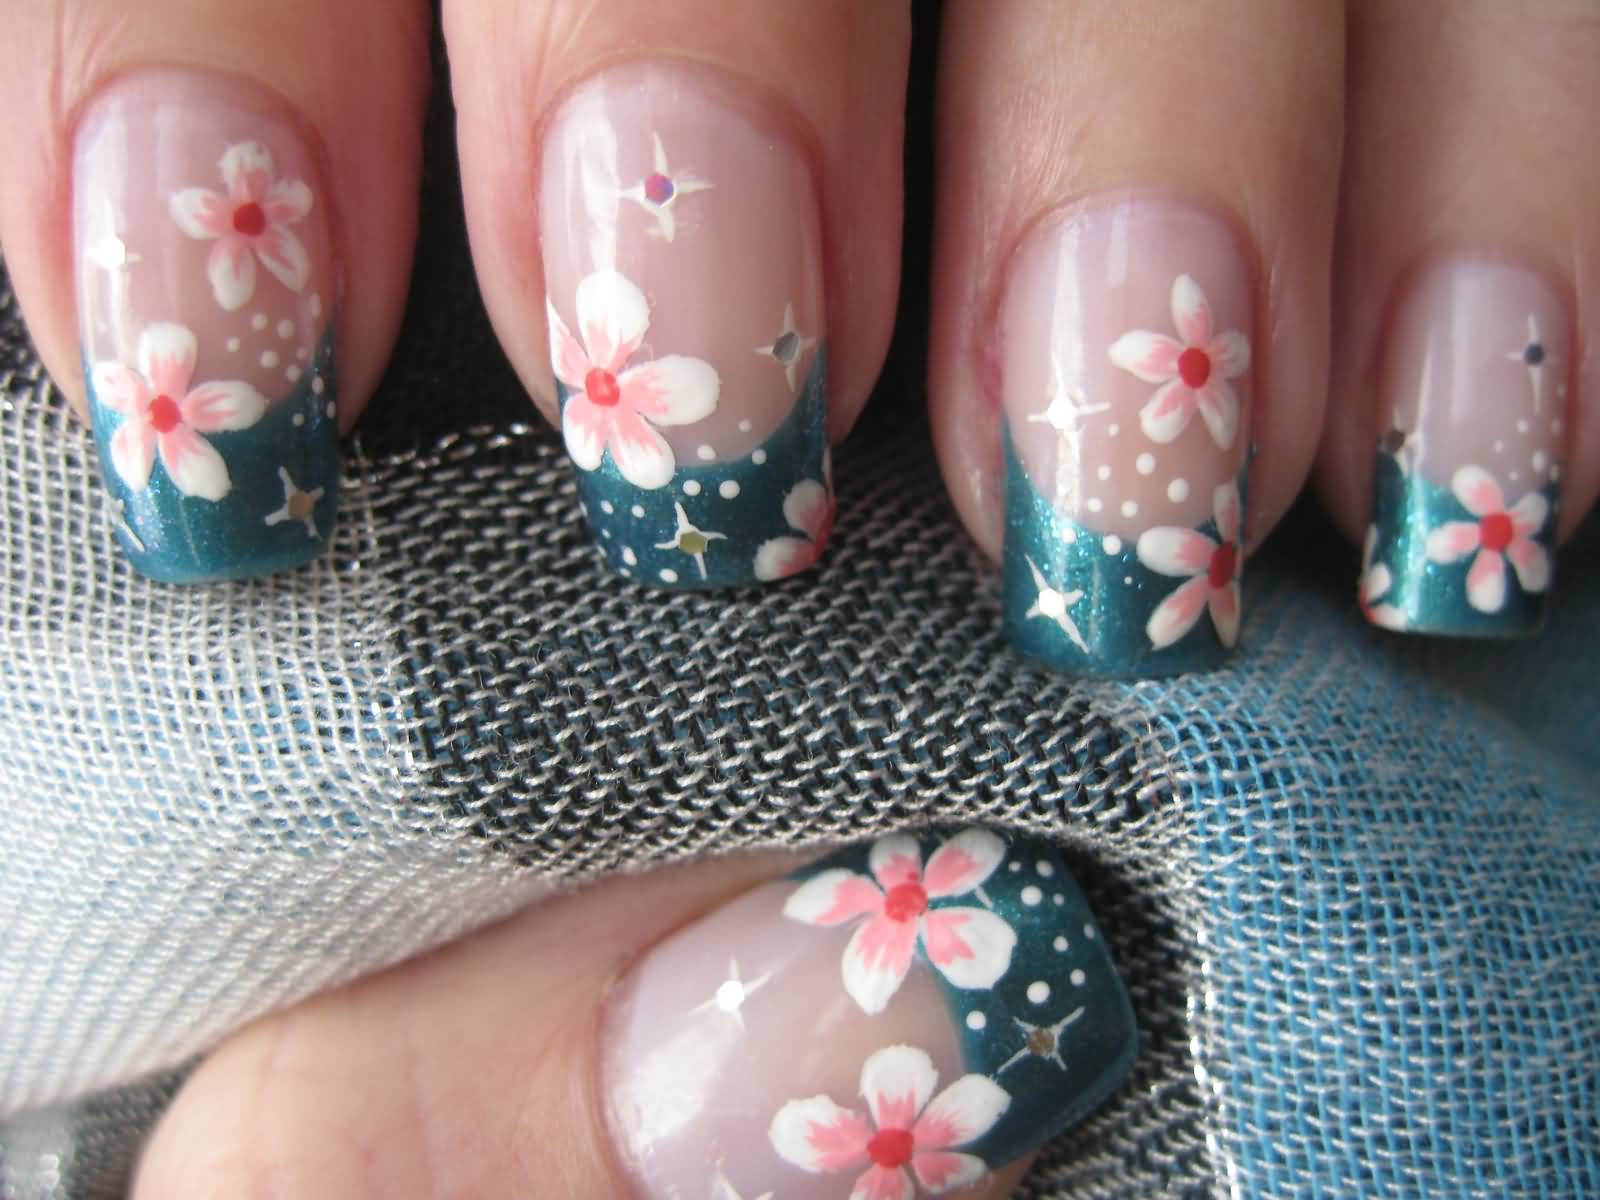 Green French Tip Nail Art With Cute Flowers Design